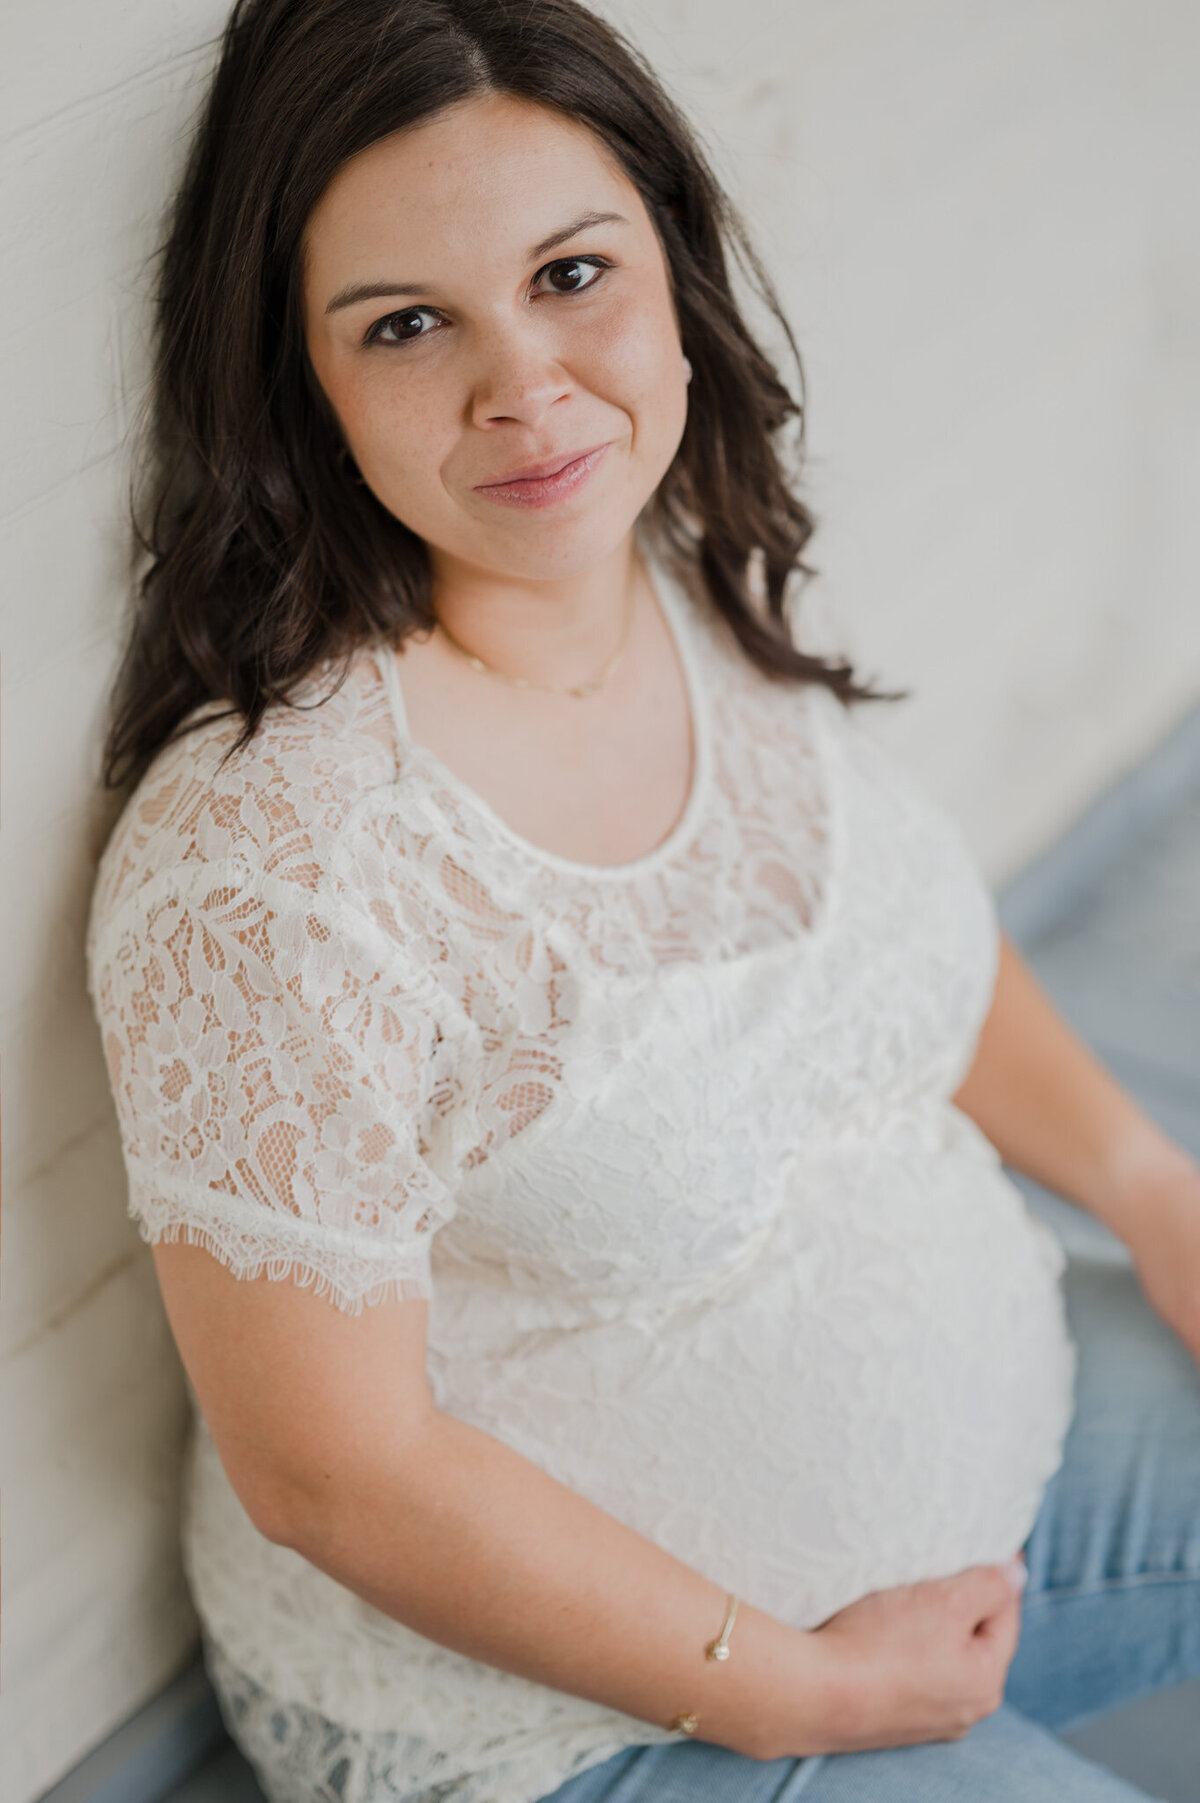 Portrait of an expecting woman in a lace shirt.